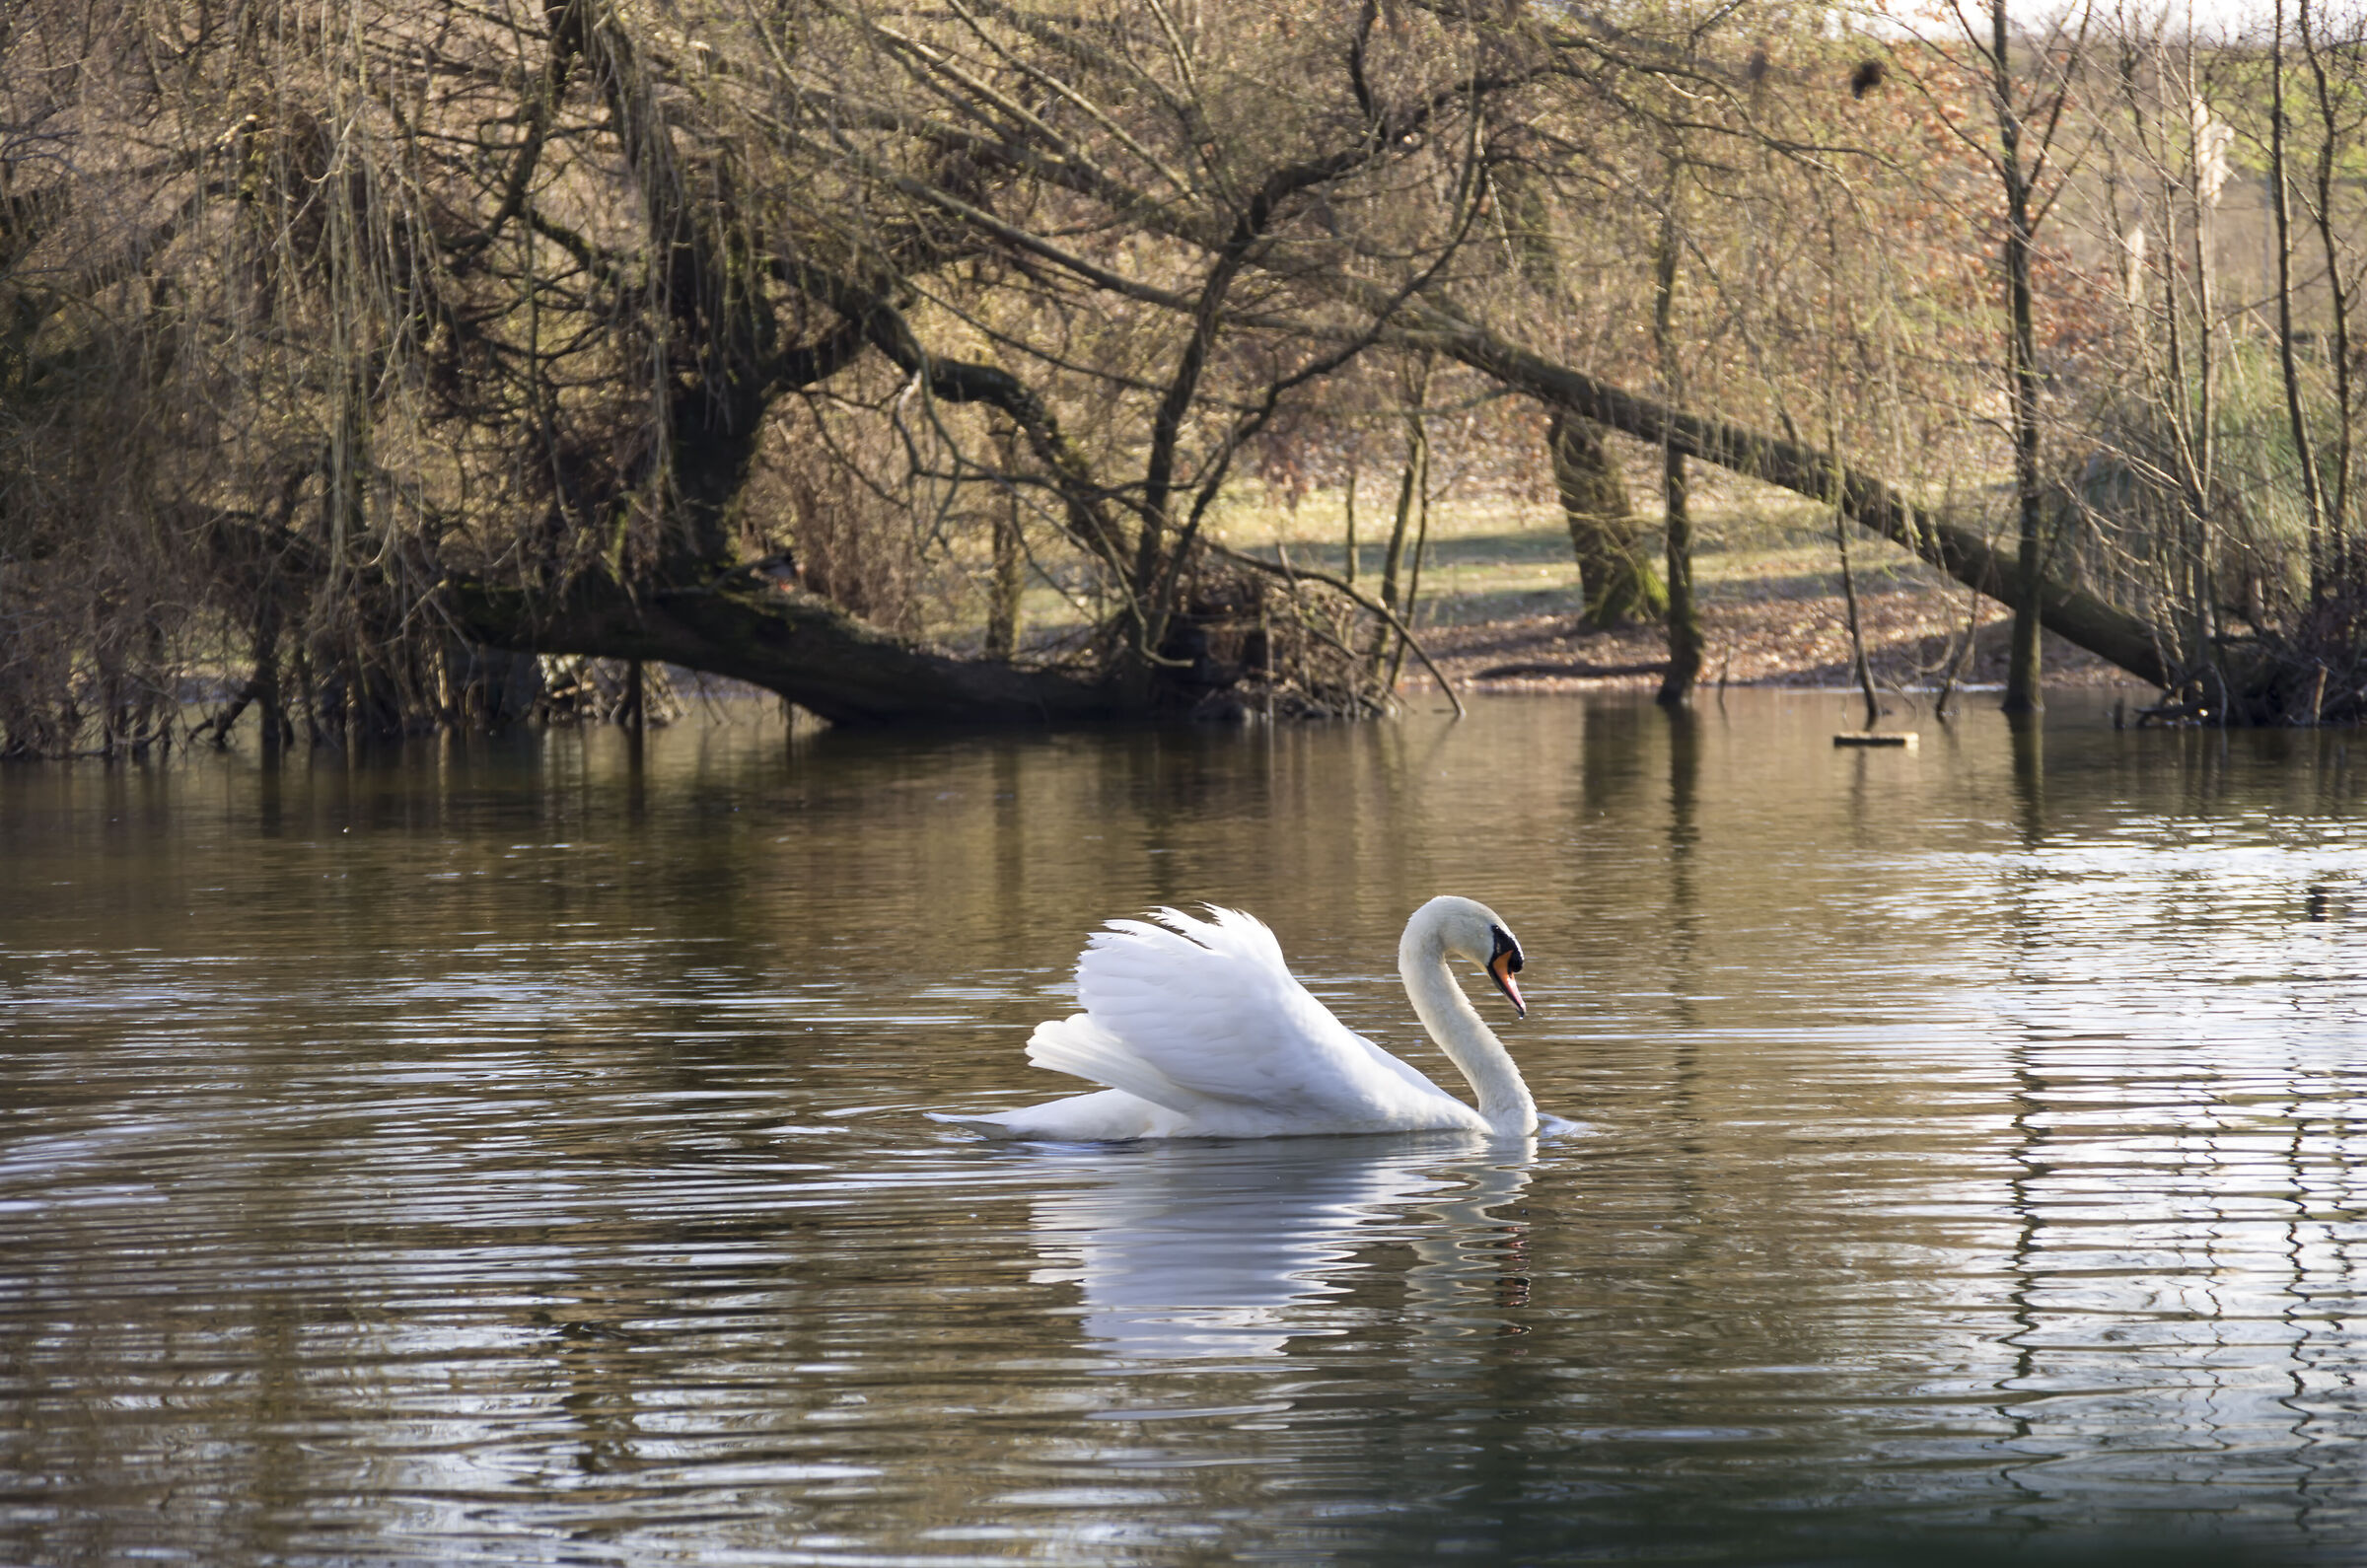 The Solitude of the Swan...